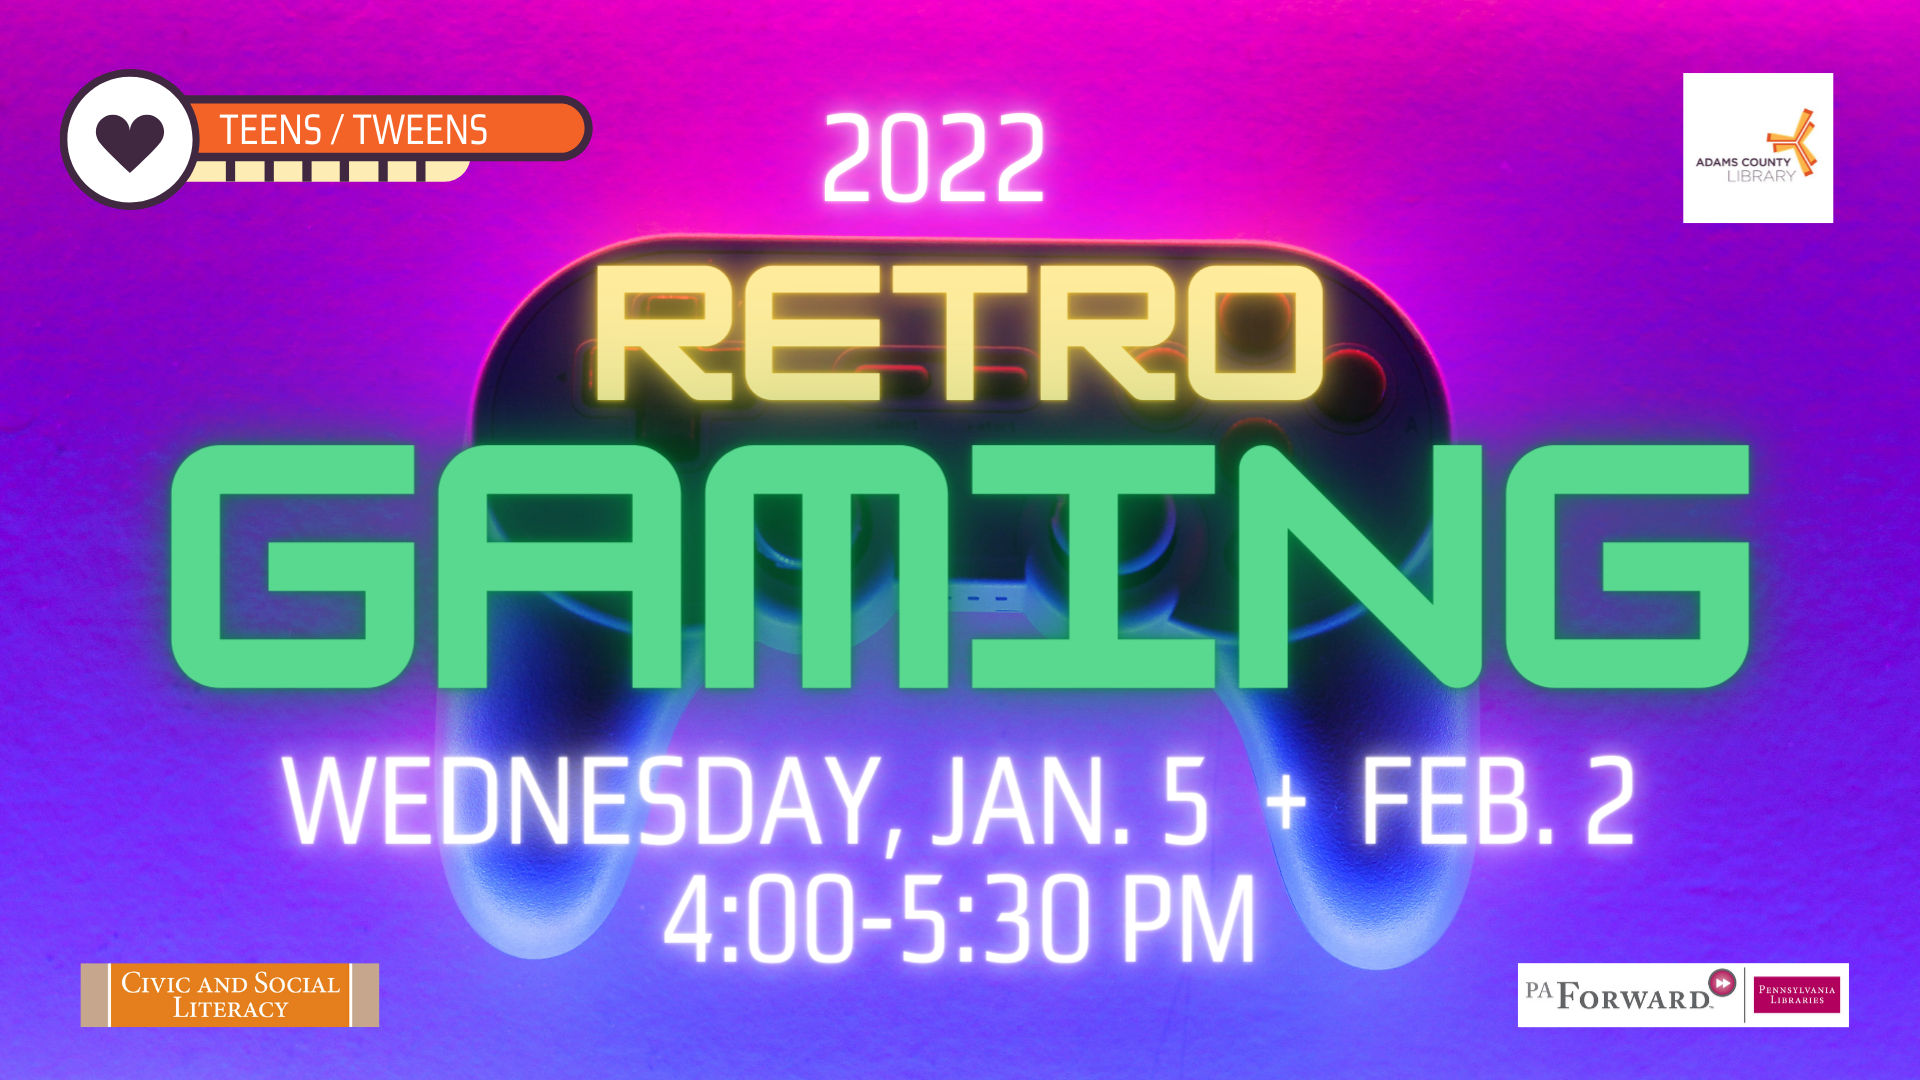 Join us for Retro Gaming the first Wednesday of the month. For tweens and teens.